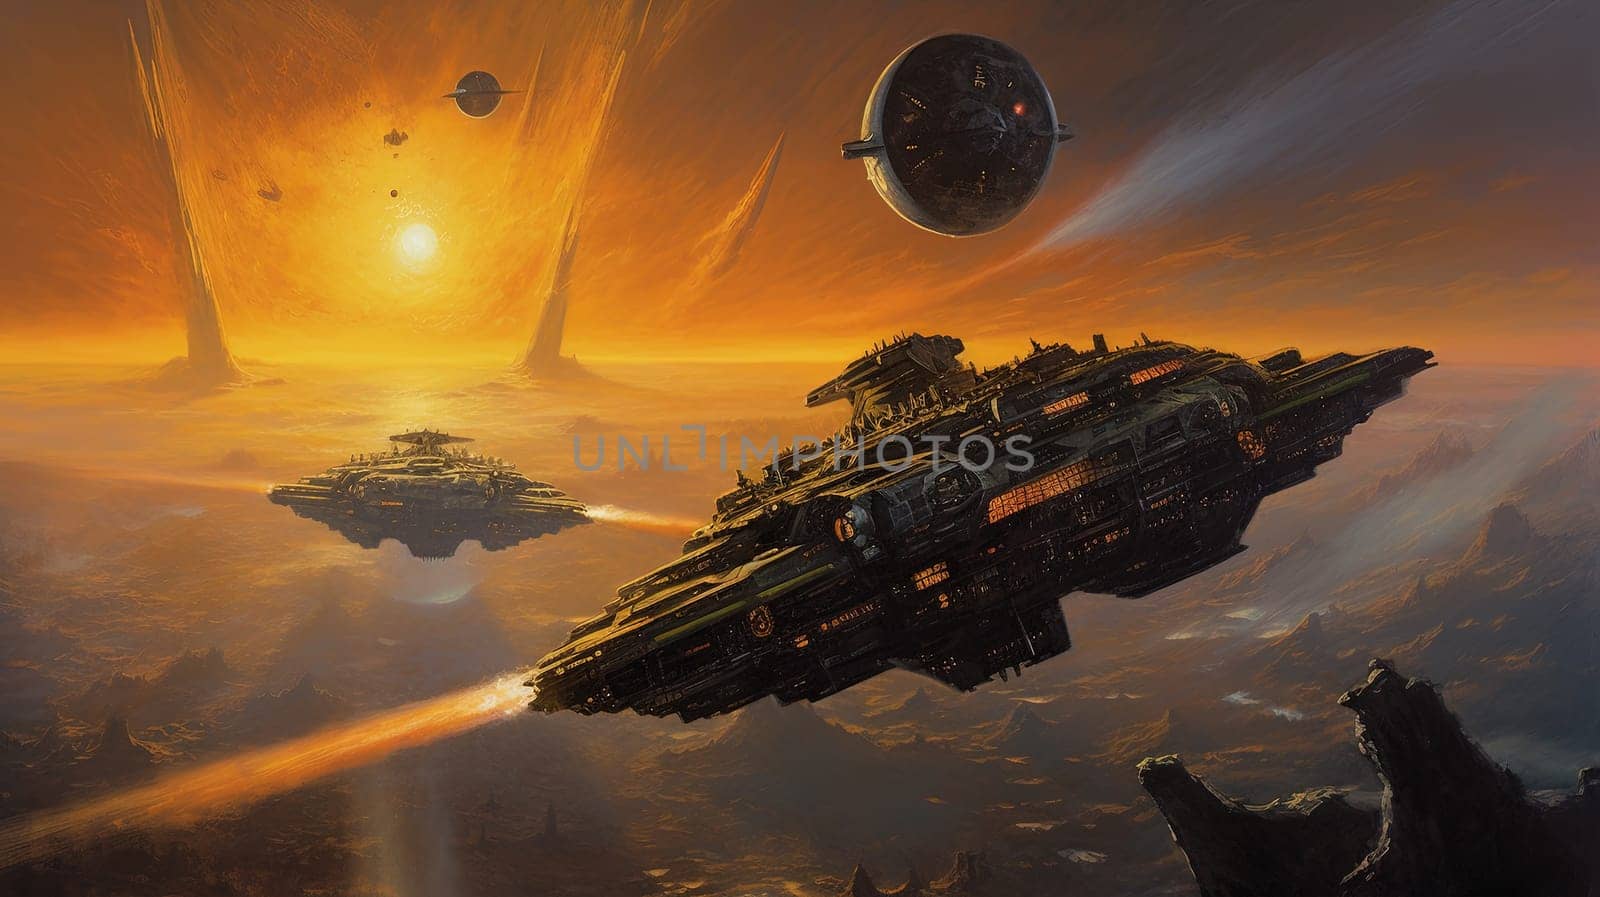 Space ships battle over alien planet in 80s books style. Retro science fiction illustration. Generated AI. by SwillKch